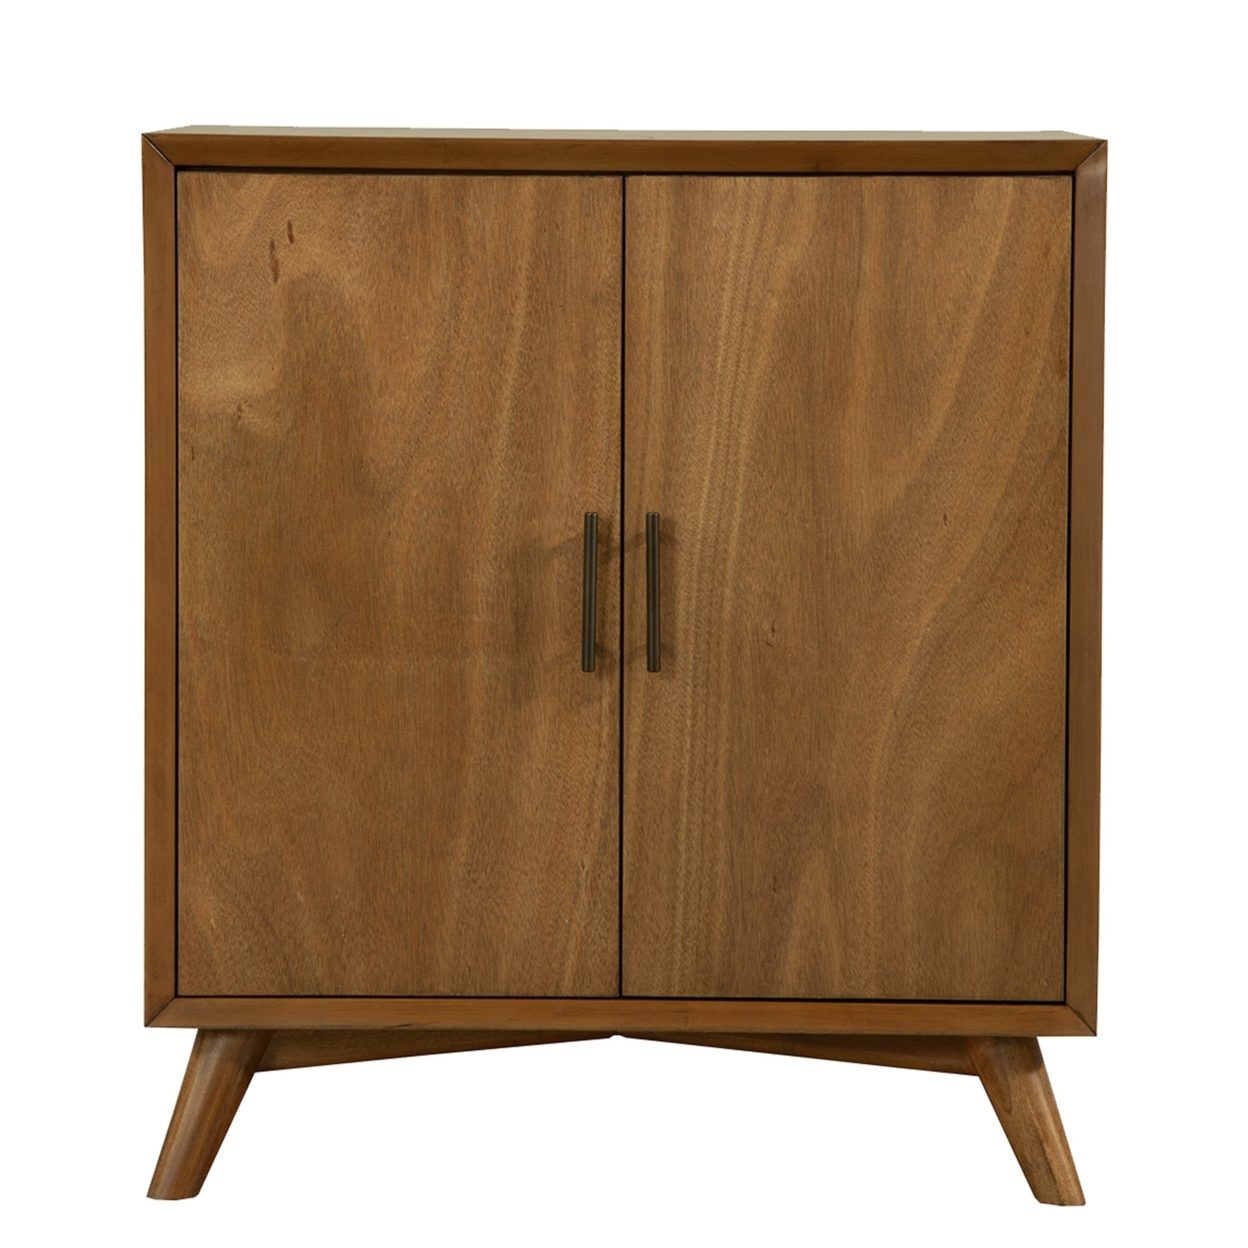 Wooden Small Bar Cabinet With Two Doors And Splayed Legs, Brown- Saltoro Sherpi